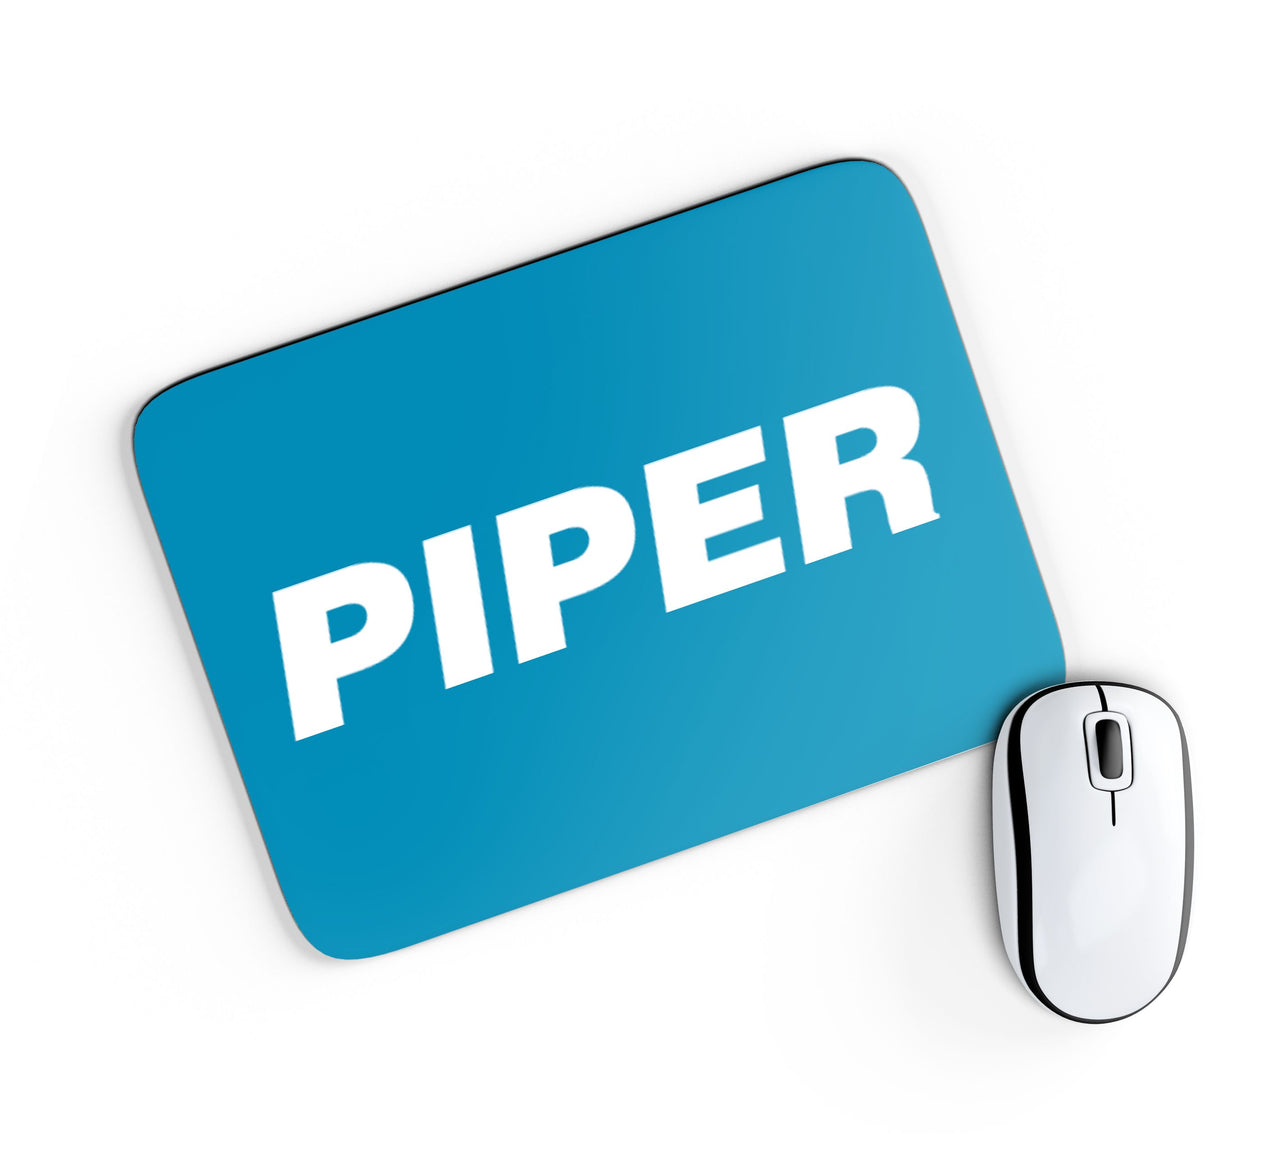 Piper & Text Designed Mouse Pads